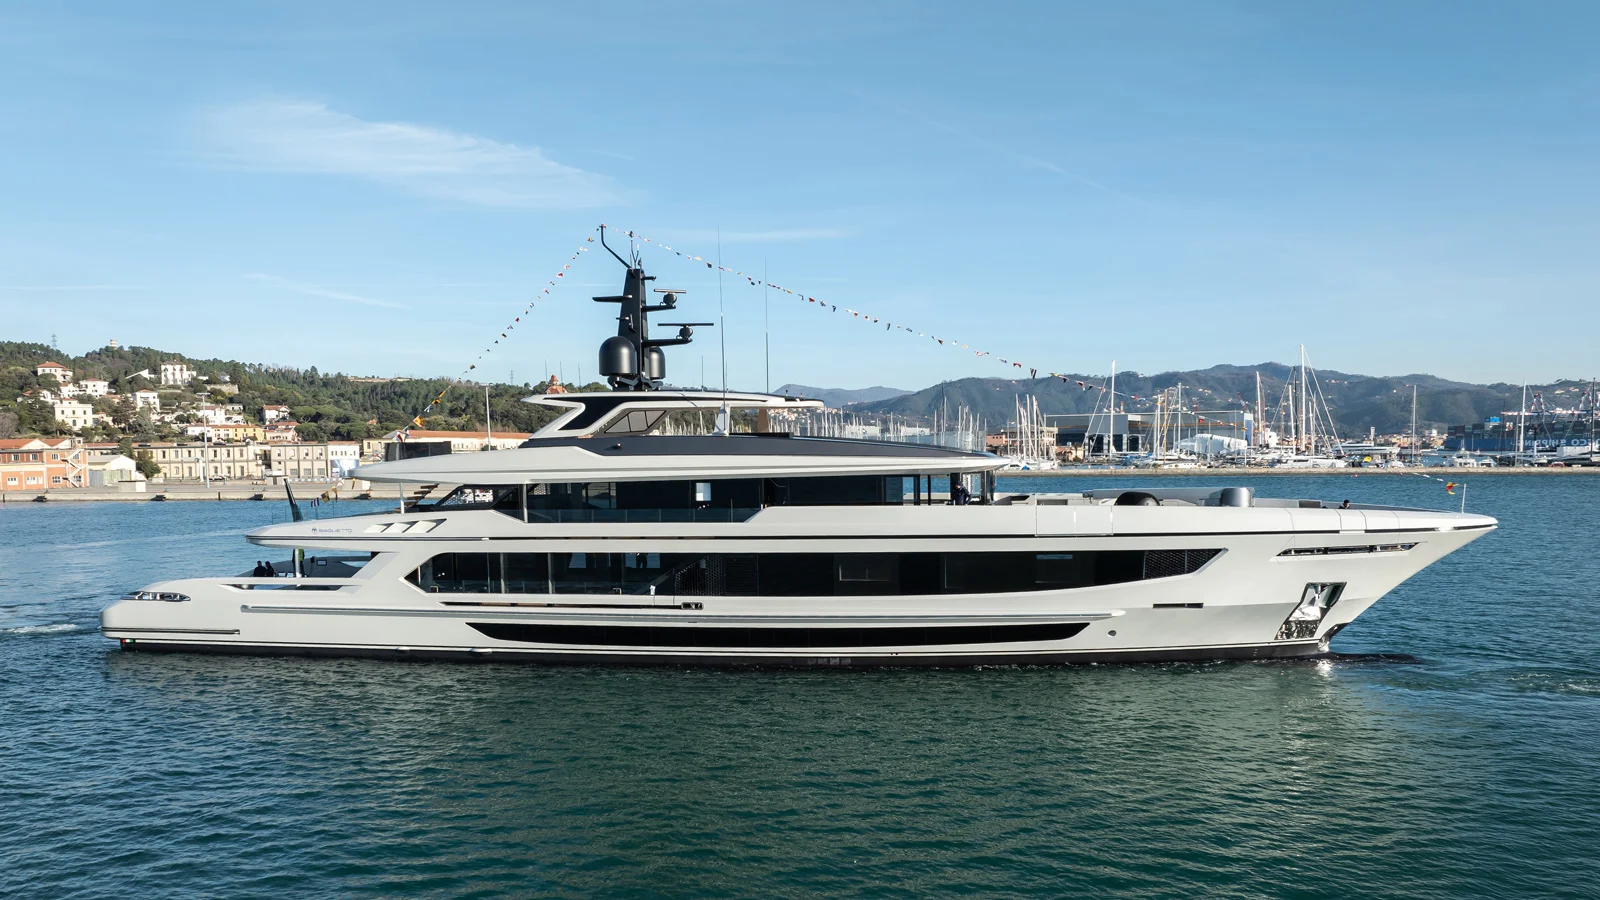 The Infinity is the second T52 yacht built by the La Spezia boat builder